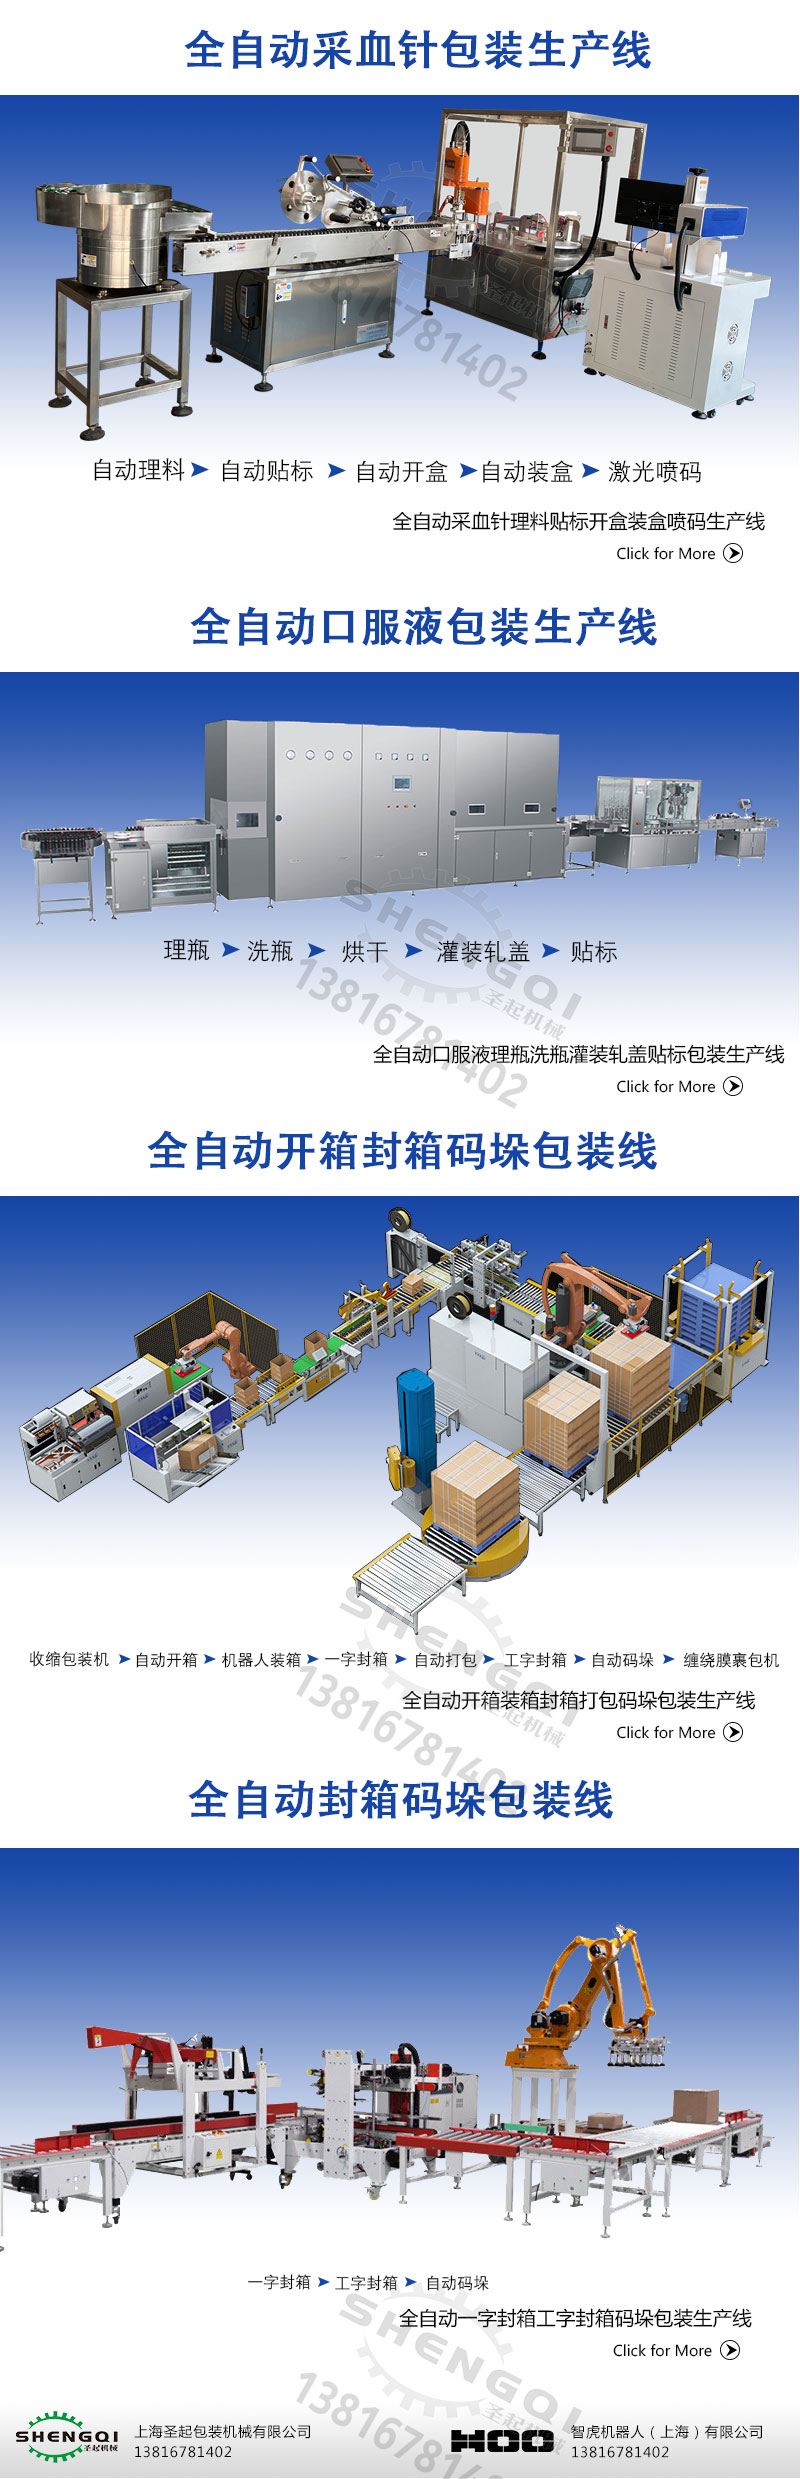 Fully automatic box filling machine for food automatic box filling and packaging machinery coffee bar solid beverage box filling and sealing machine